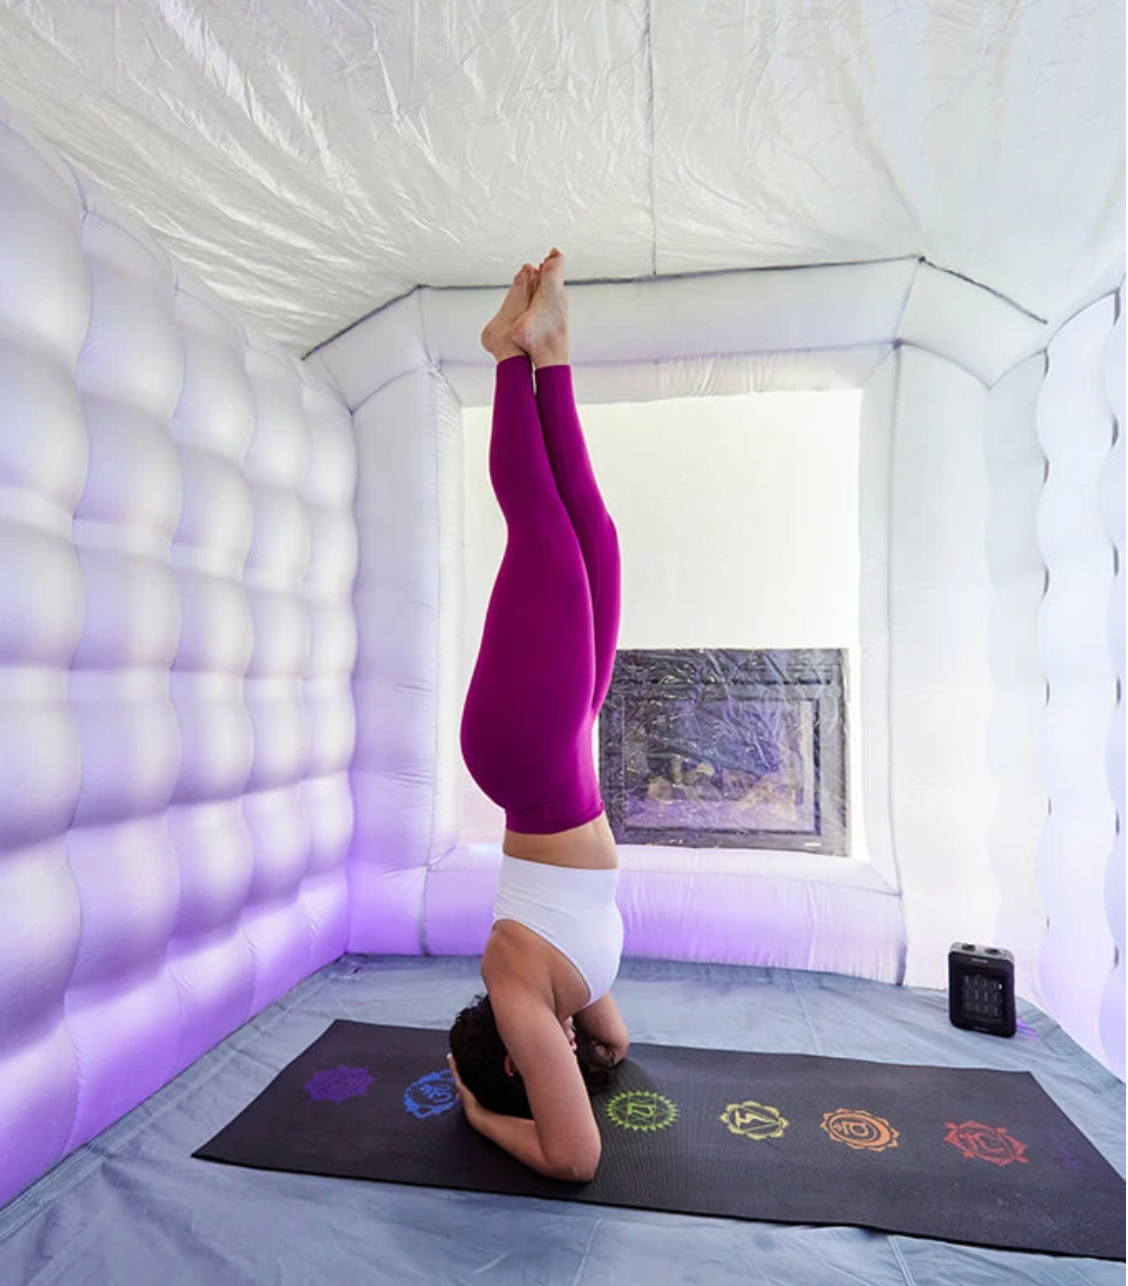 Hot Yoga at Home, ready in minutes. Hot yoga, anytime anywhere with the Hot  Yoga Dome. Learn more here:  By The Hot  Yoga Dome